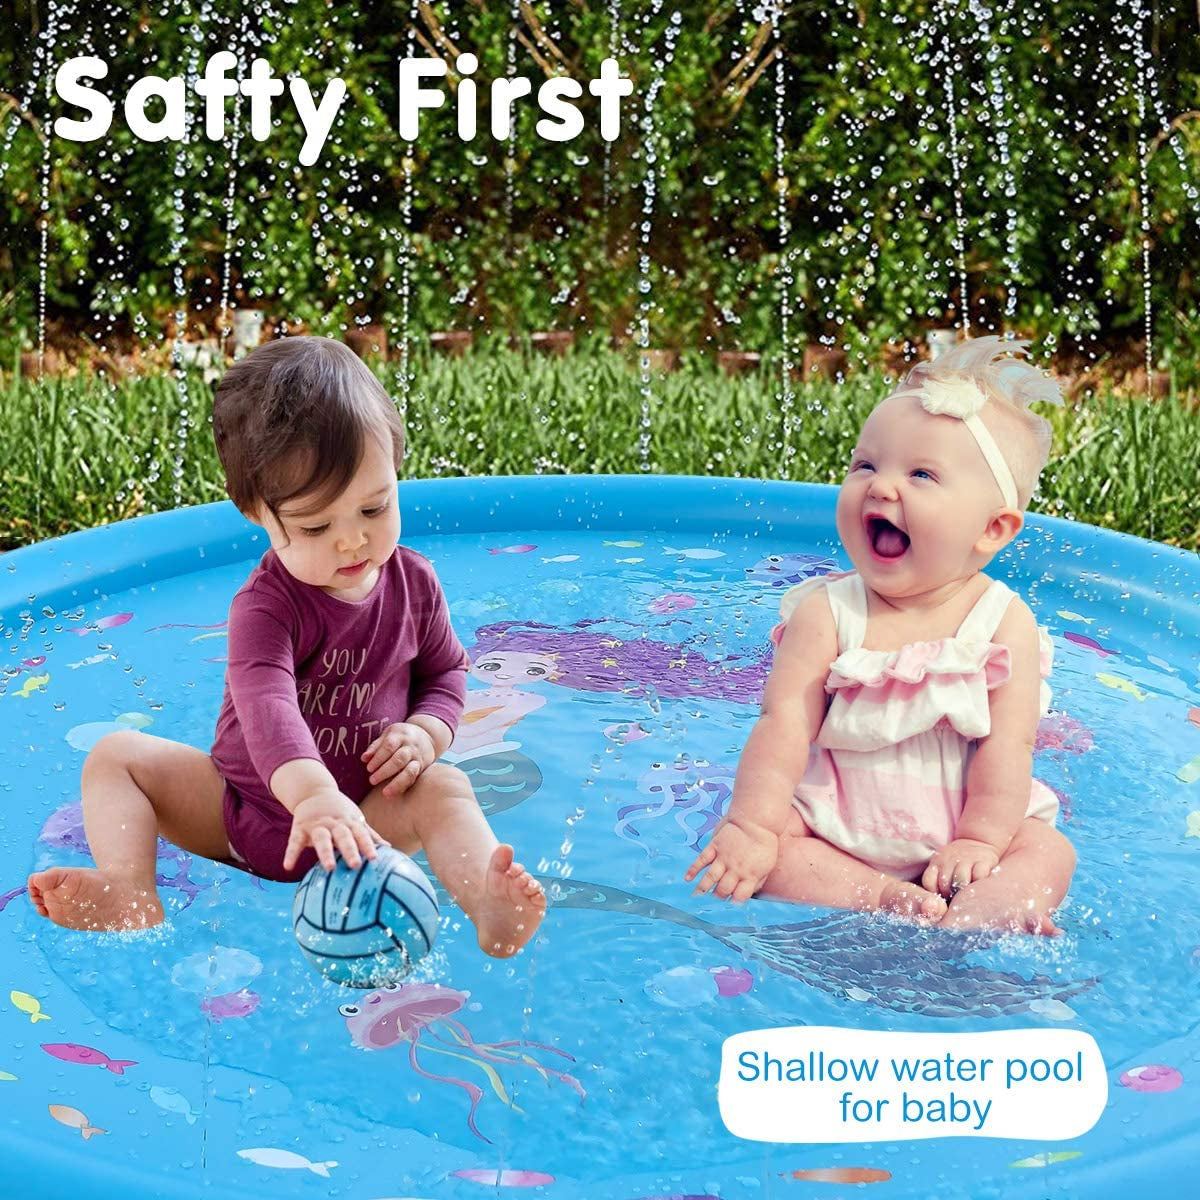 "3-in-1 Splash Pad Water Toy for Kids - Perfect Outdoor Gift for Toddlers and Babies!"